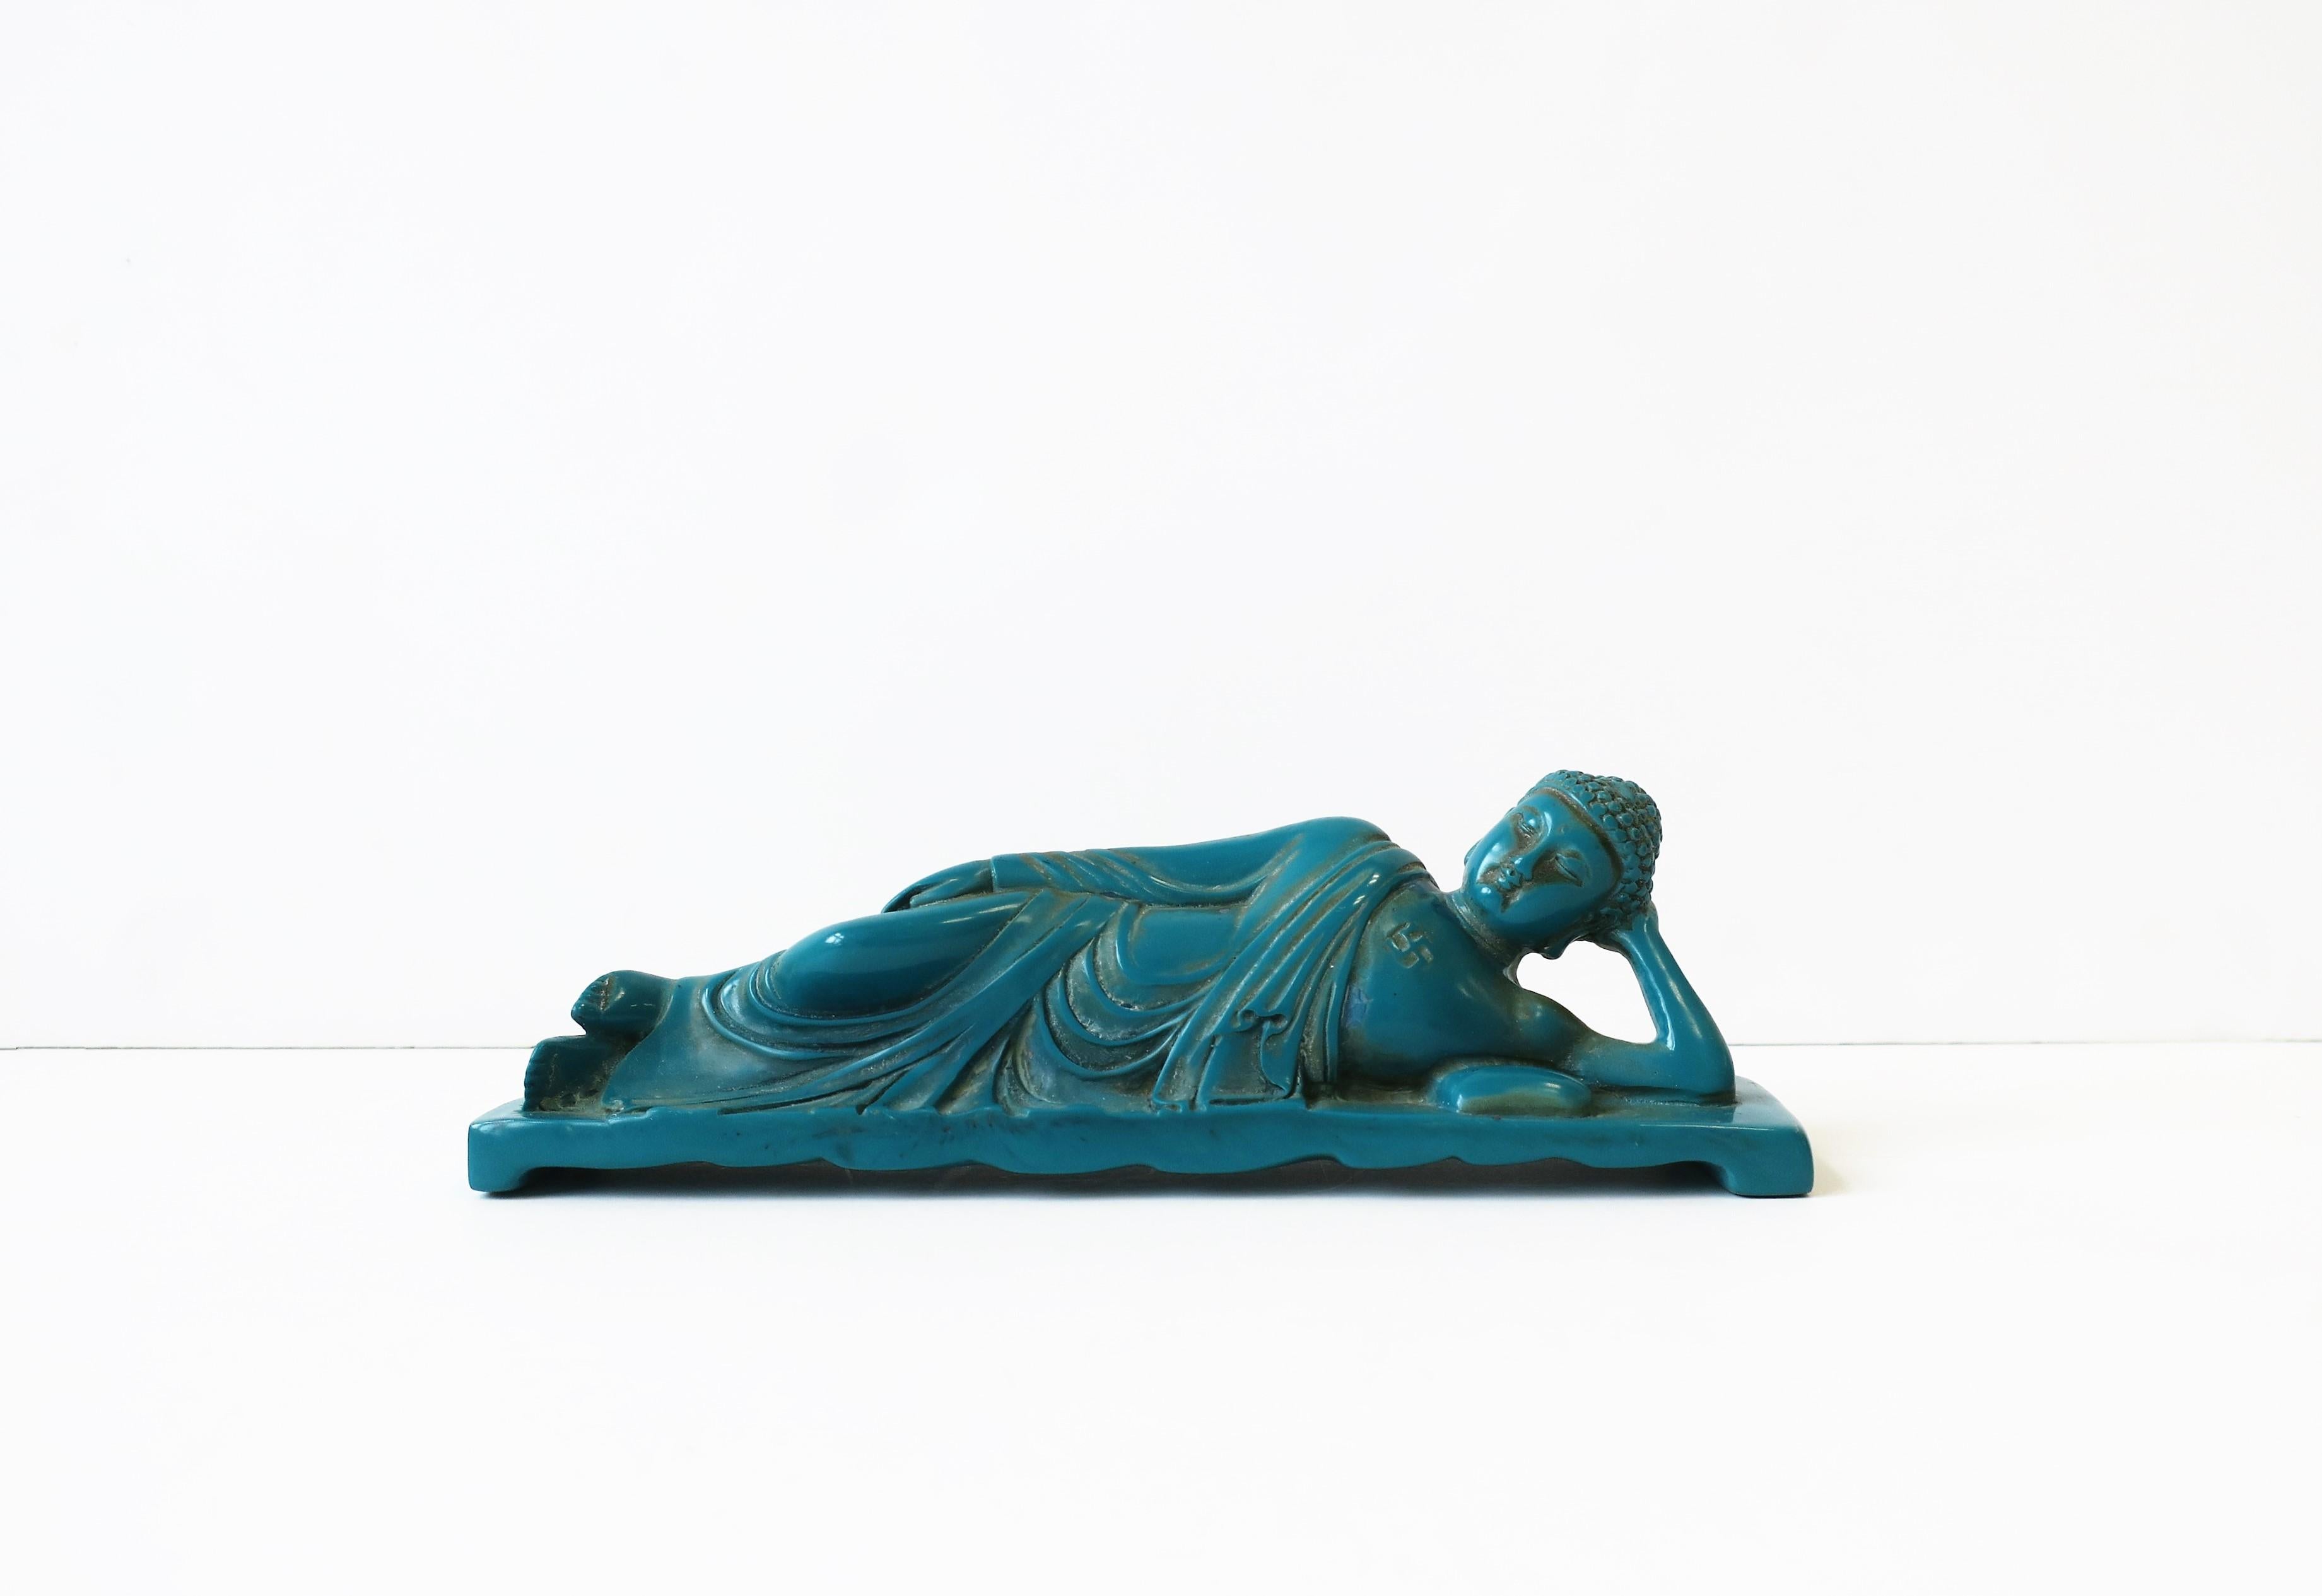 A vintage turquoise blue resin Buddha sculpture or decorative object, late-20th century, circa 1980s-1990s. Buddha is resting or 'lounging' on bed with pillow. Piece measures: 2.75